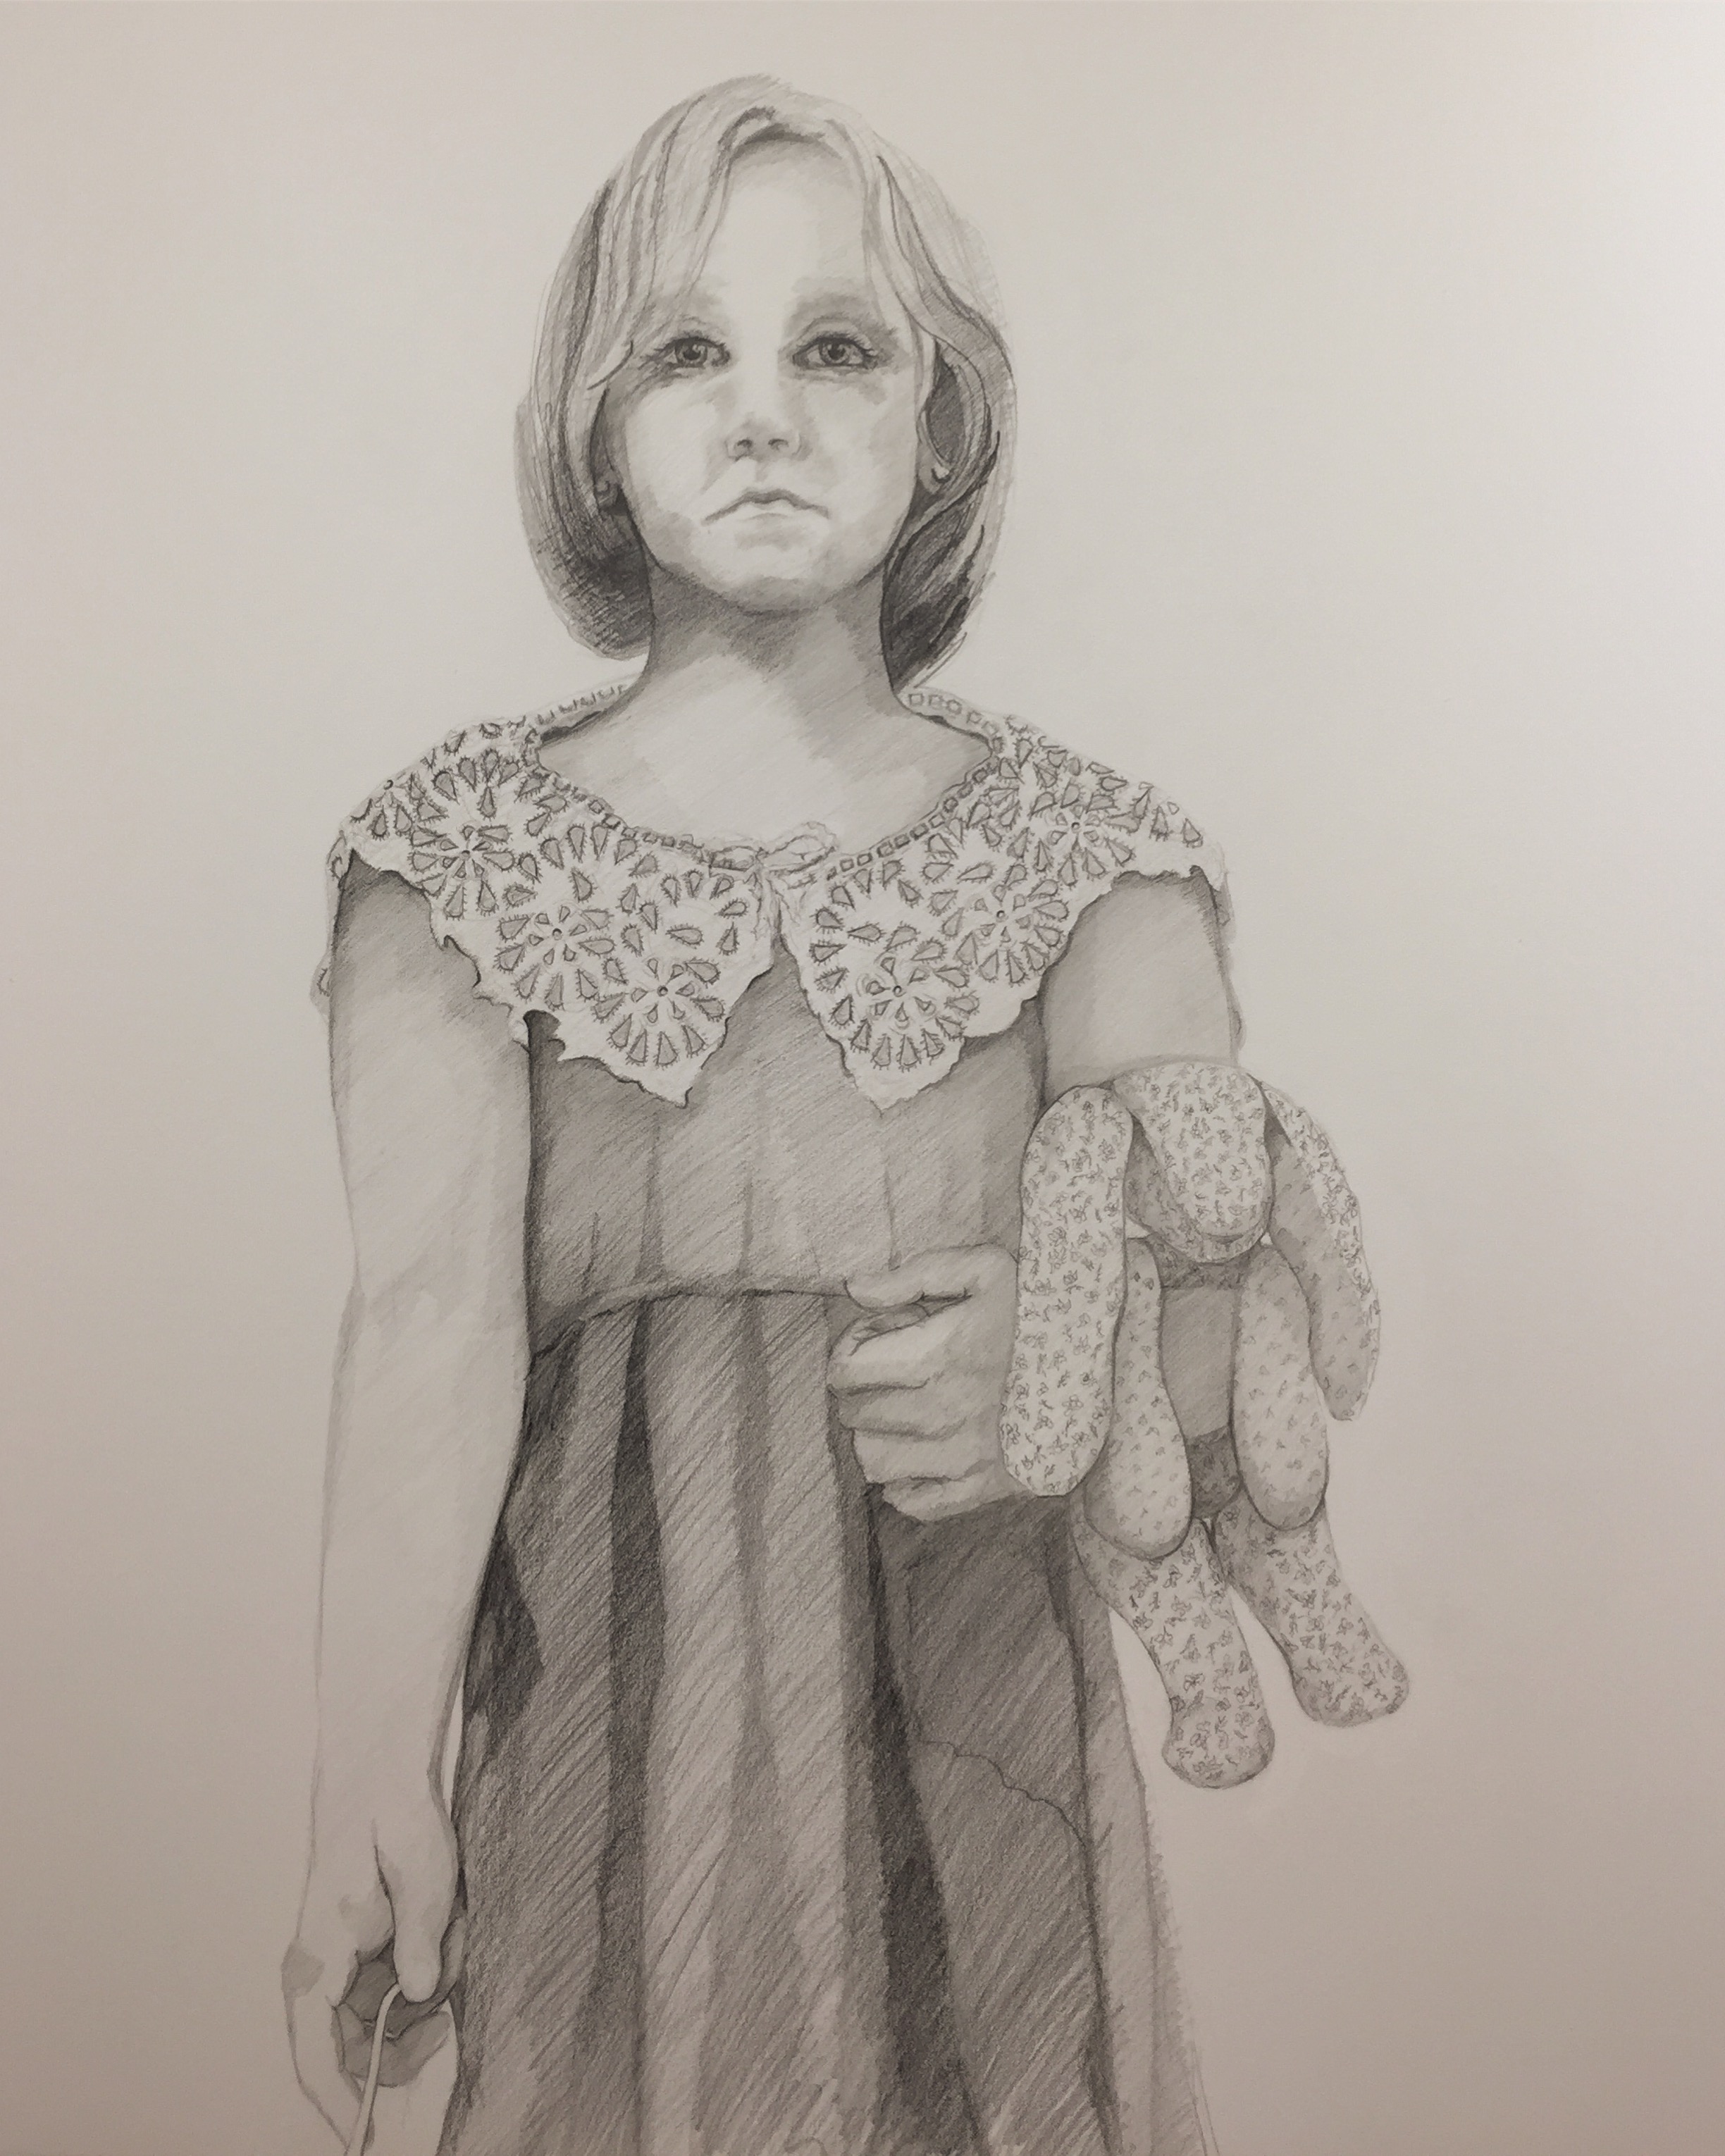 Study for Vesper | Sarah West the Collision of Culture and Lack of Civility series 30x 40" Graphite on Paper (2018)